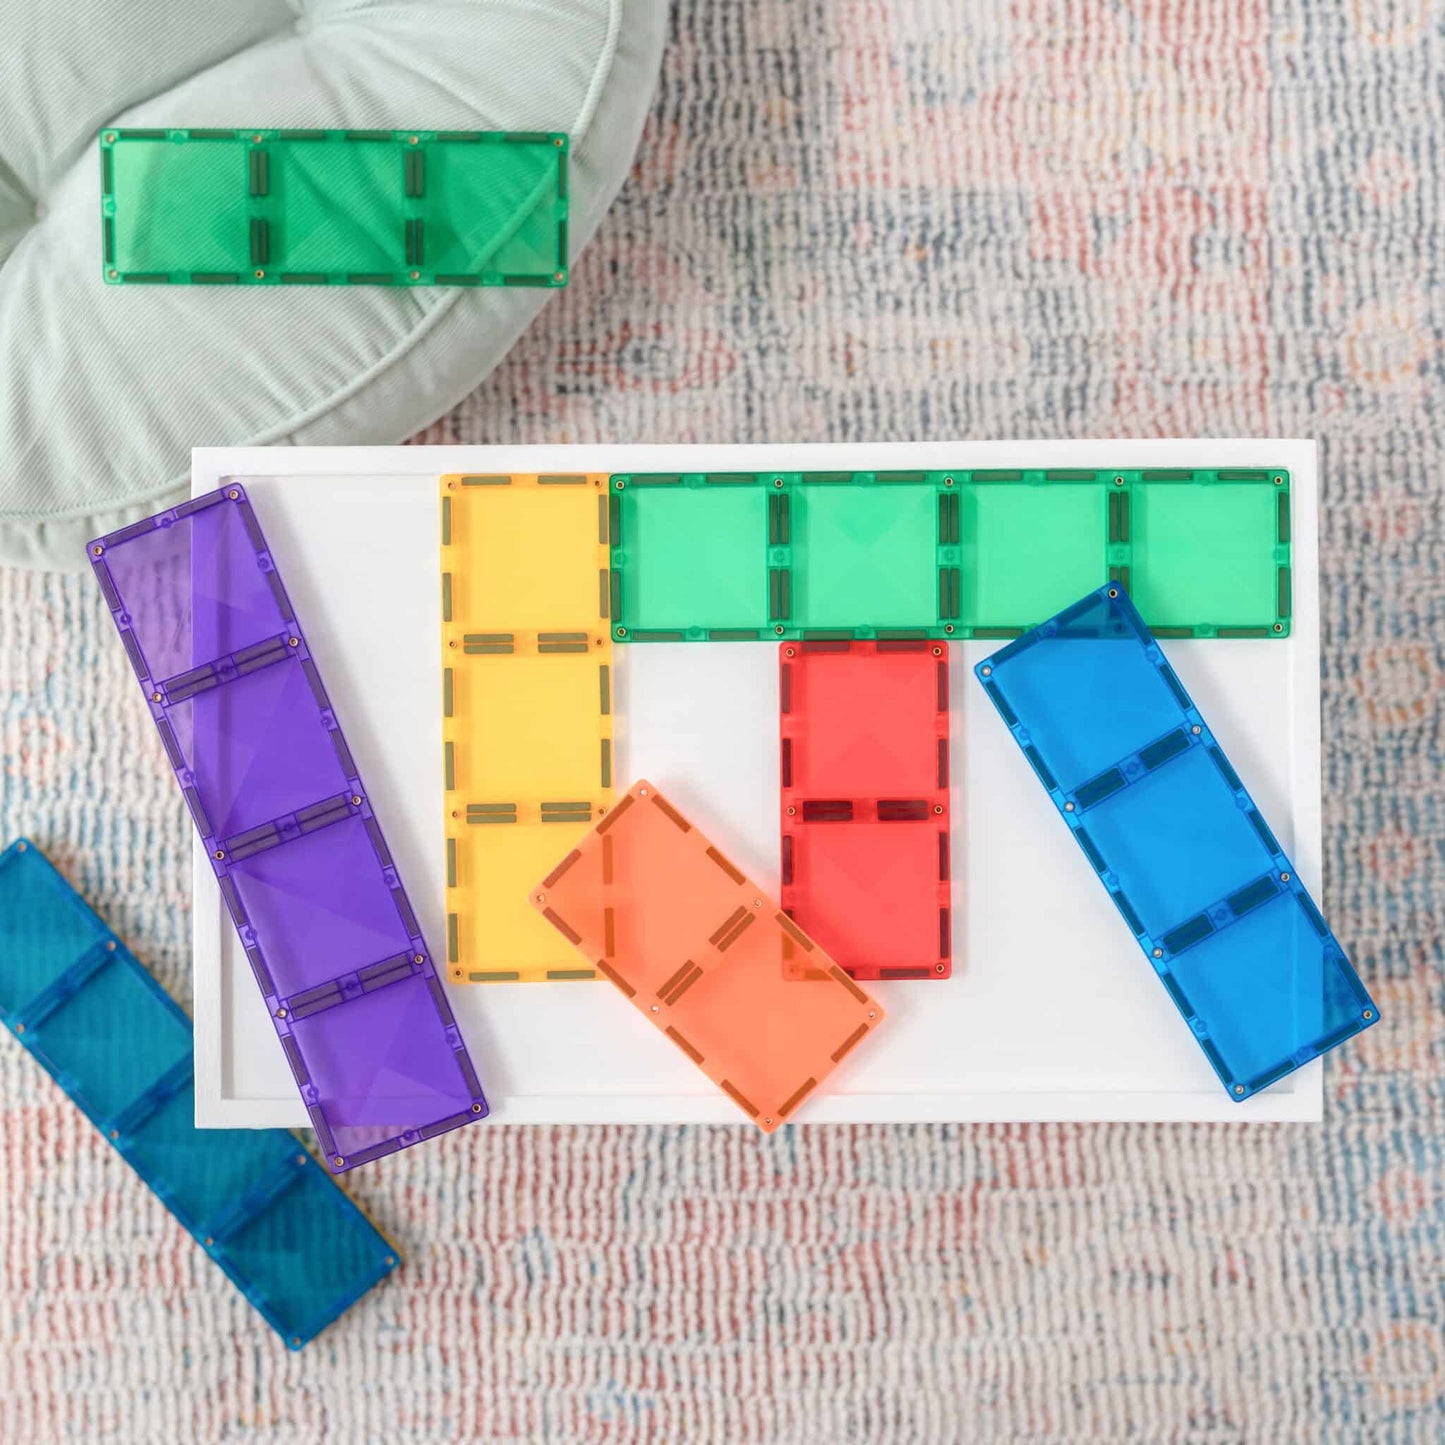 [Connetix Tiles] 18 Pieces Rainbow Rectangle Pack | Educational Magnetic Tiles Learning | NEW RELEASE